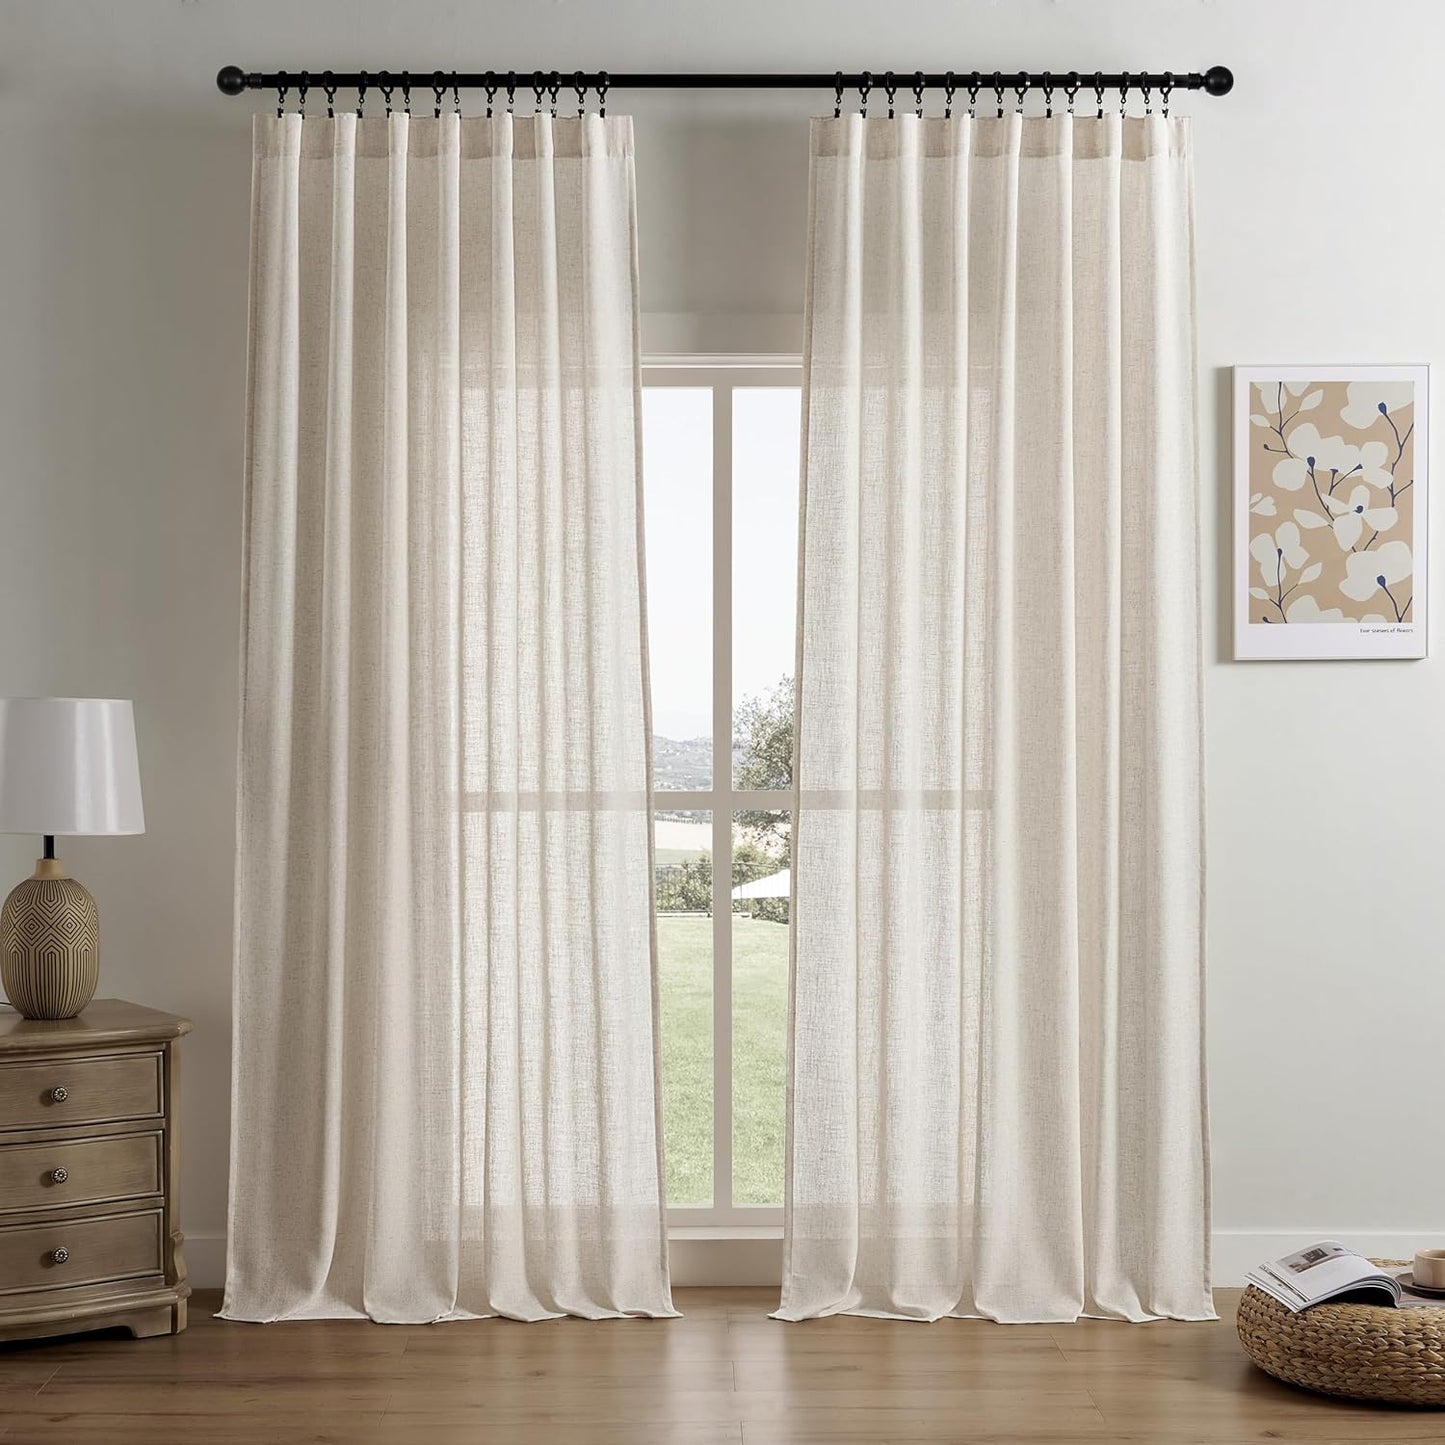 Joydeco Linen Curtains for Living Room,Semi-Sheer Curtains 108 Inches Long,Living Room Curtains 2 Panel Sets,White Curtains Pinch Pleated Curtains & Drapes(W52 X L108 Inch, Off-White)  Joydeco Ecru 52W X 72L Inch X 2 Panels 